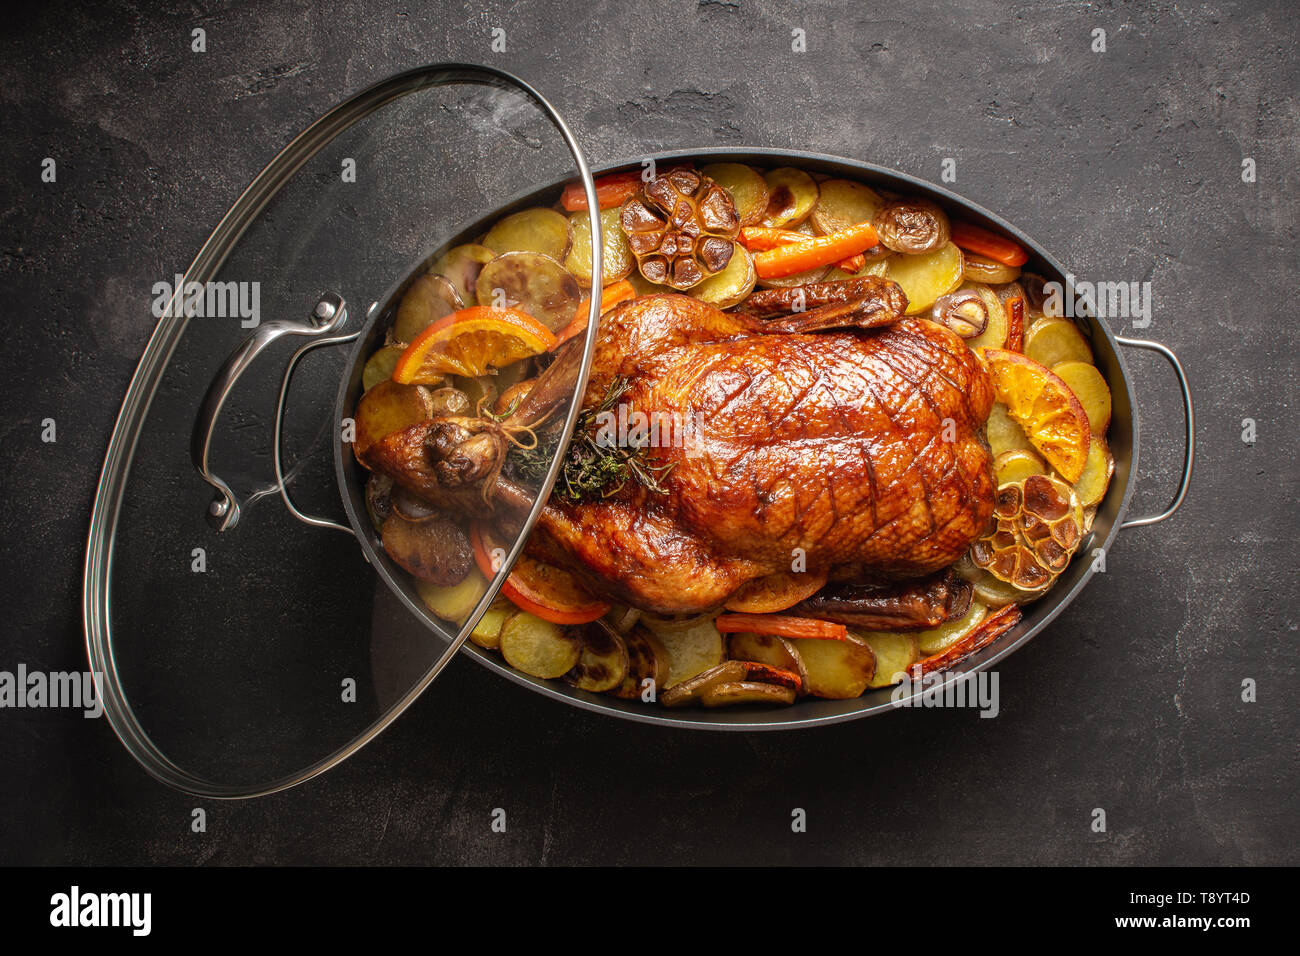 Christmas Duck Baked with Potatoes, Carrots and Oranges. Festive Food Concept. Stock Photo